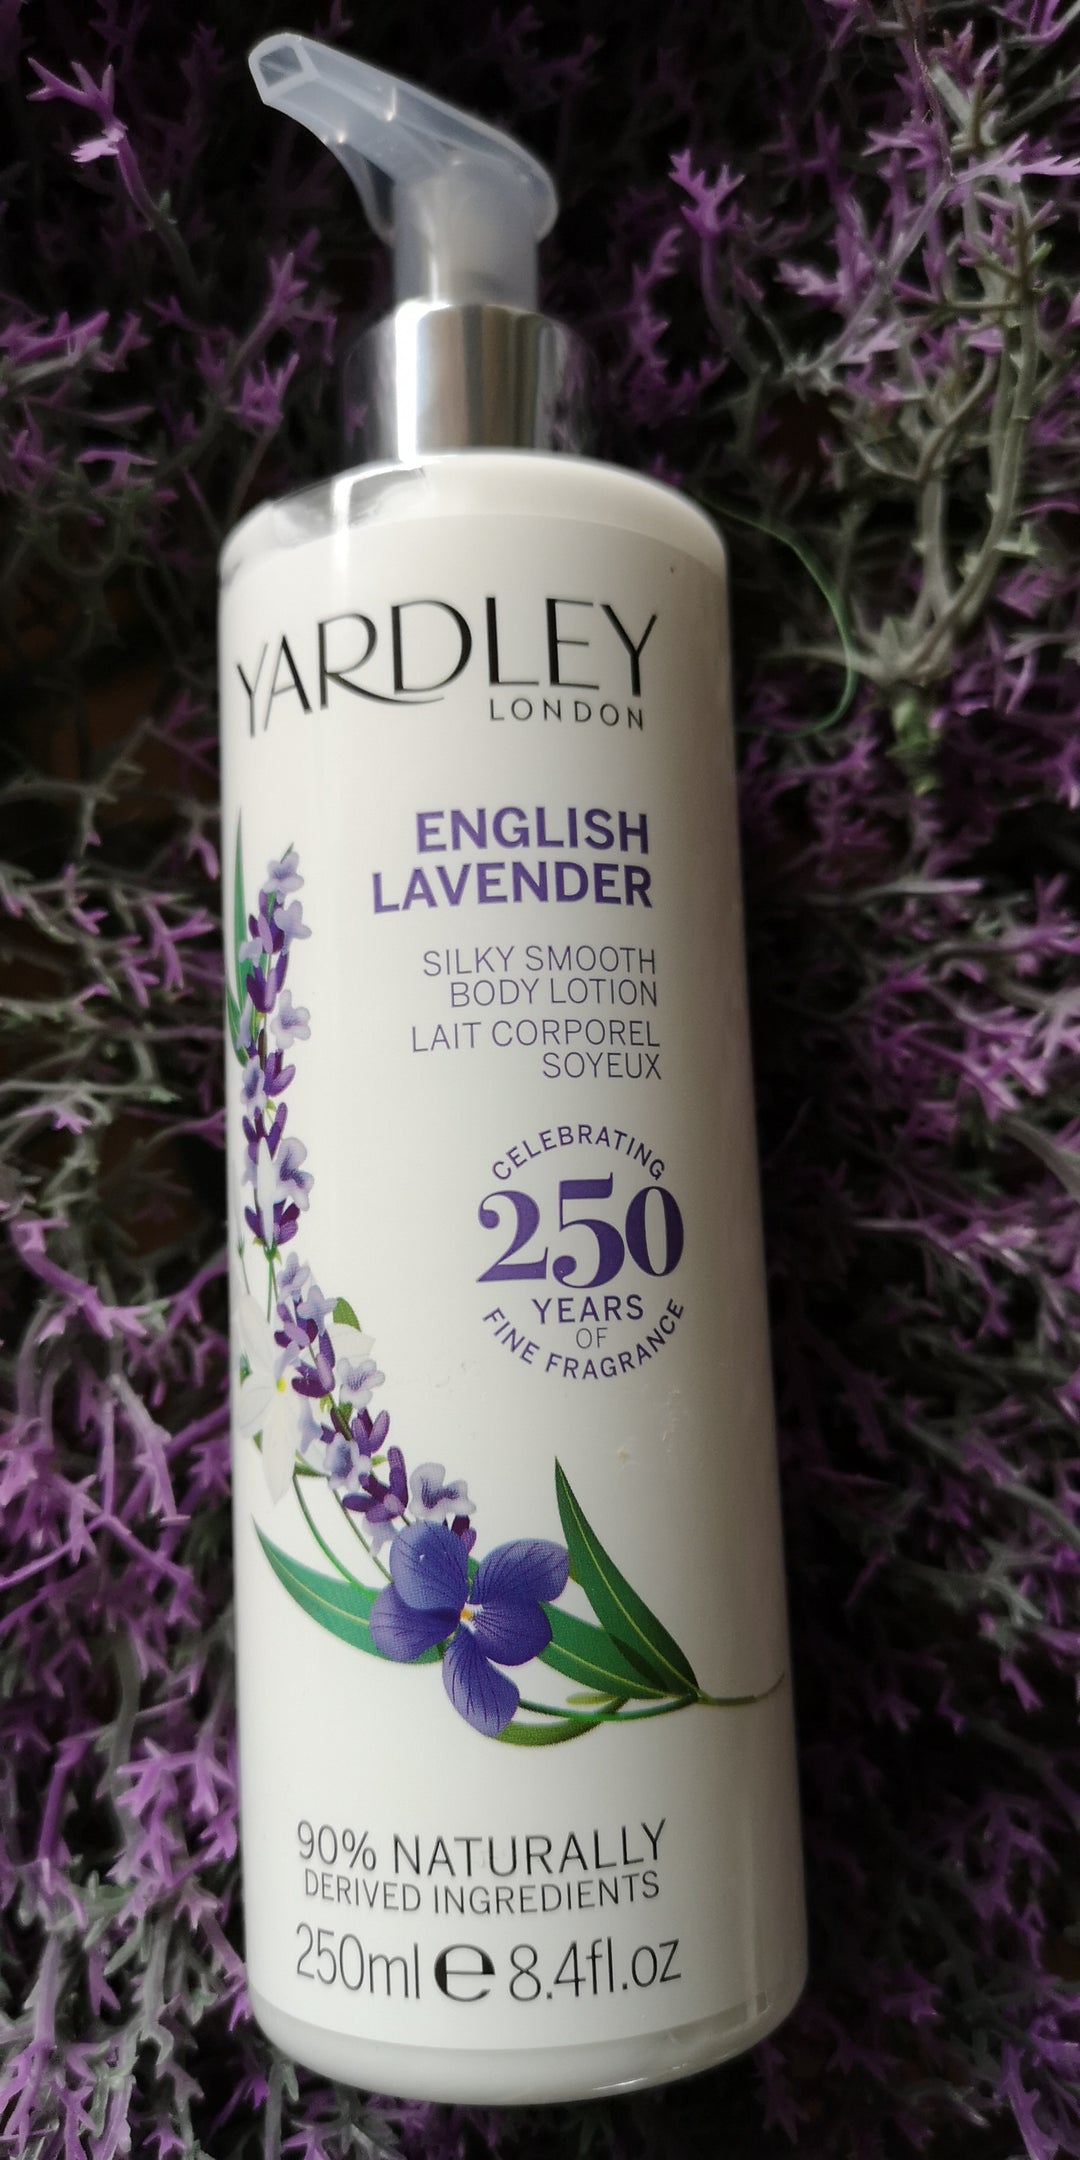 Yardley Silky Smooth English Lavender Body Lotion, 250 ml Spenderflasche - British Moments